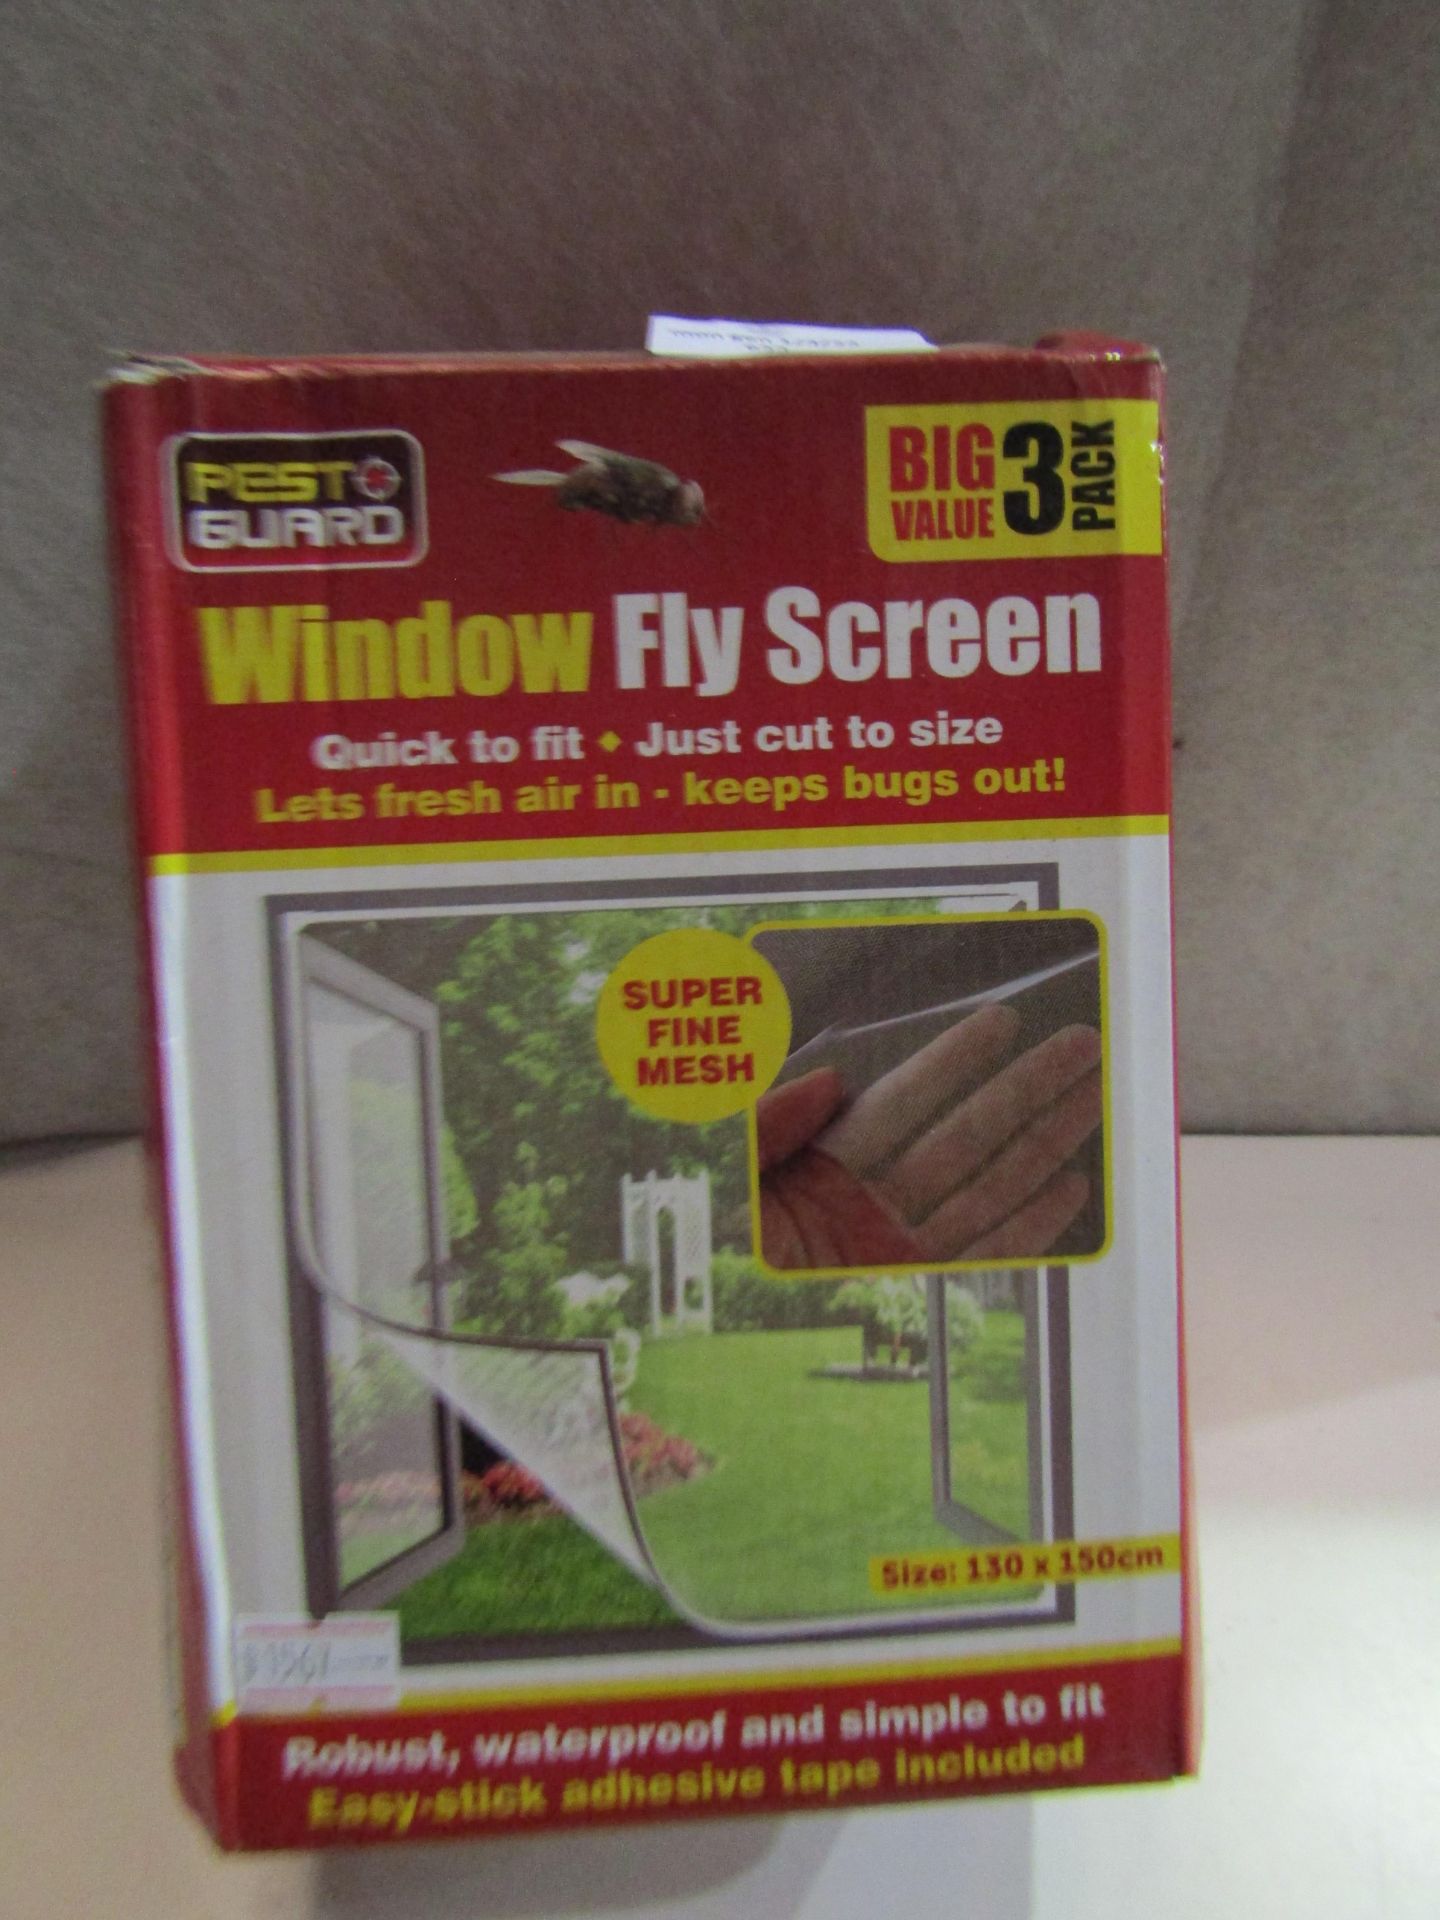 2X Pest Guard Window Fly Screen 130 X 150 CM Unchecked & Boxed